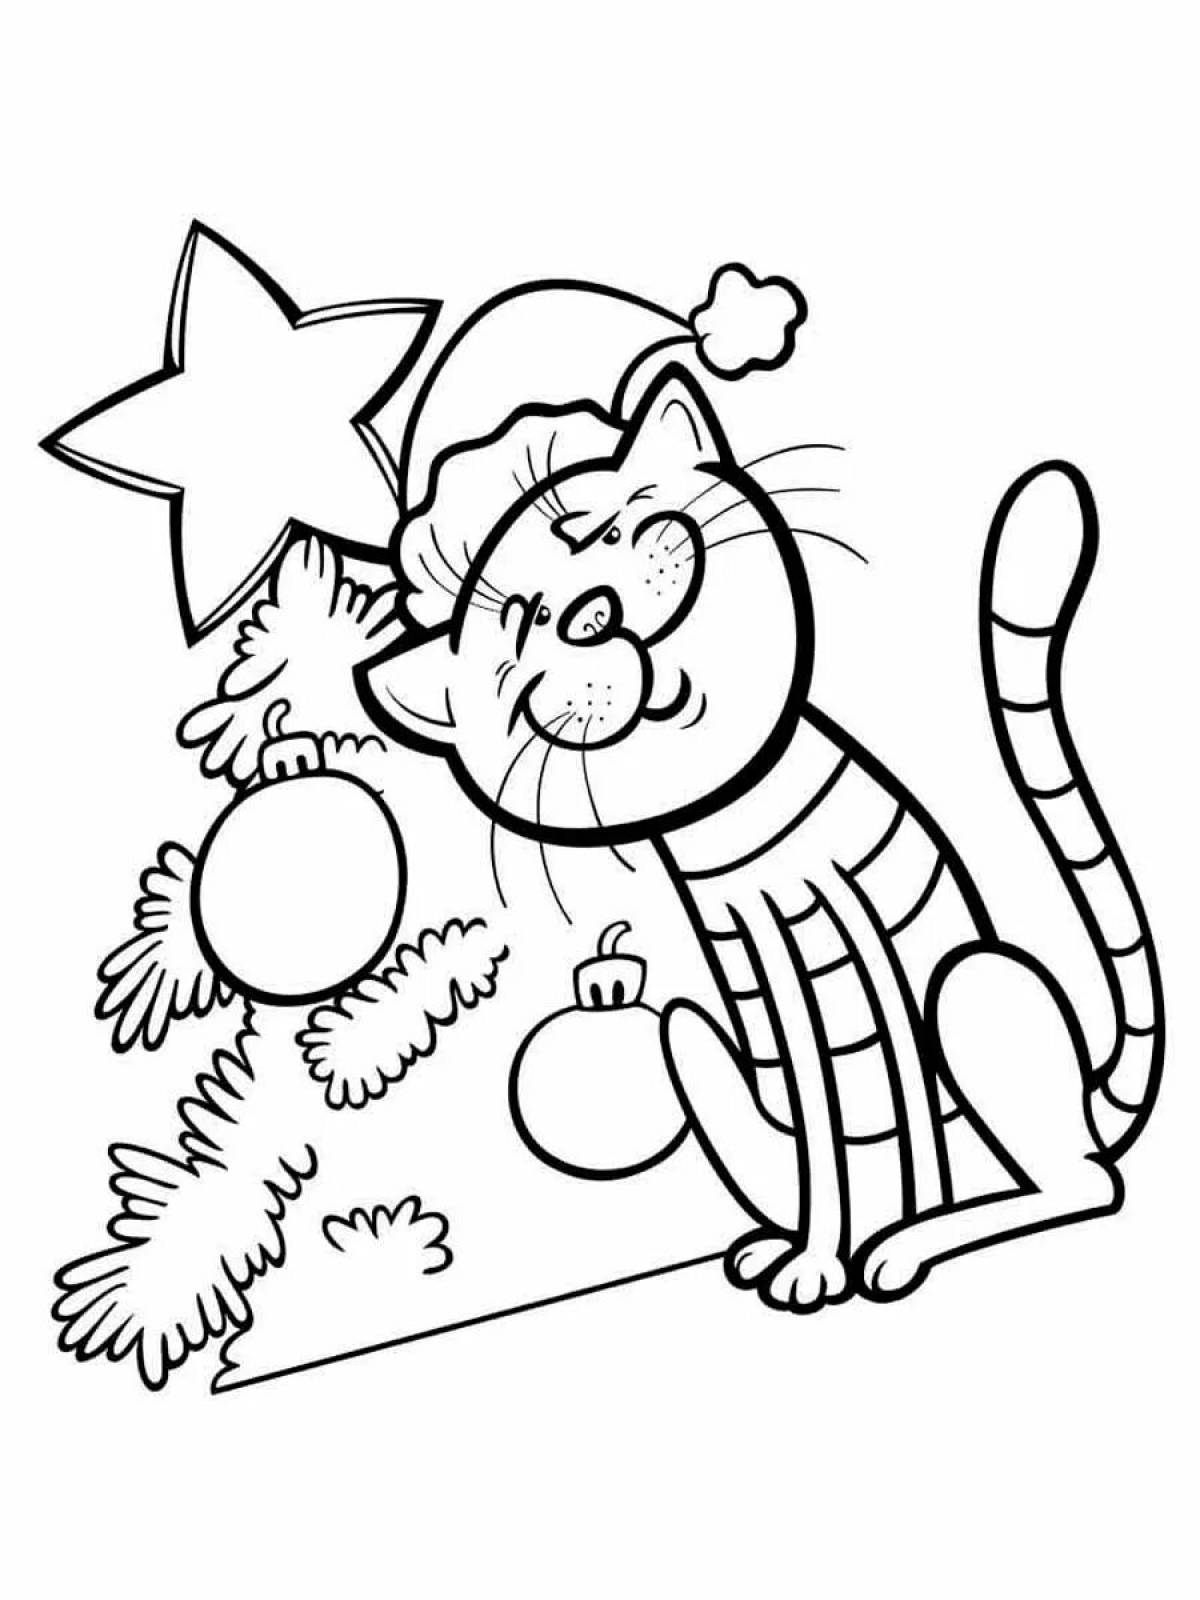 Coloring great cat new year